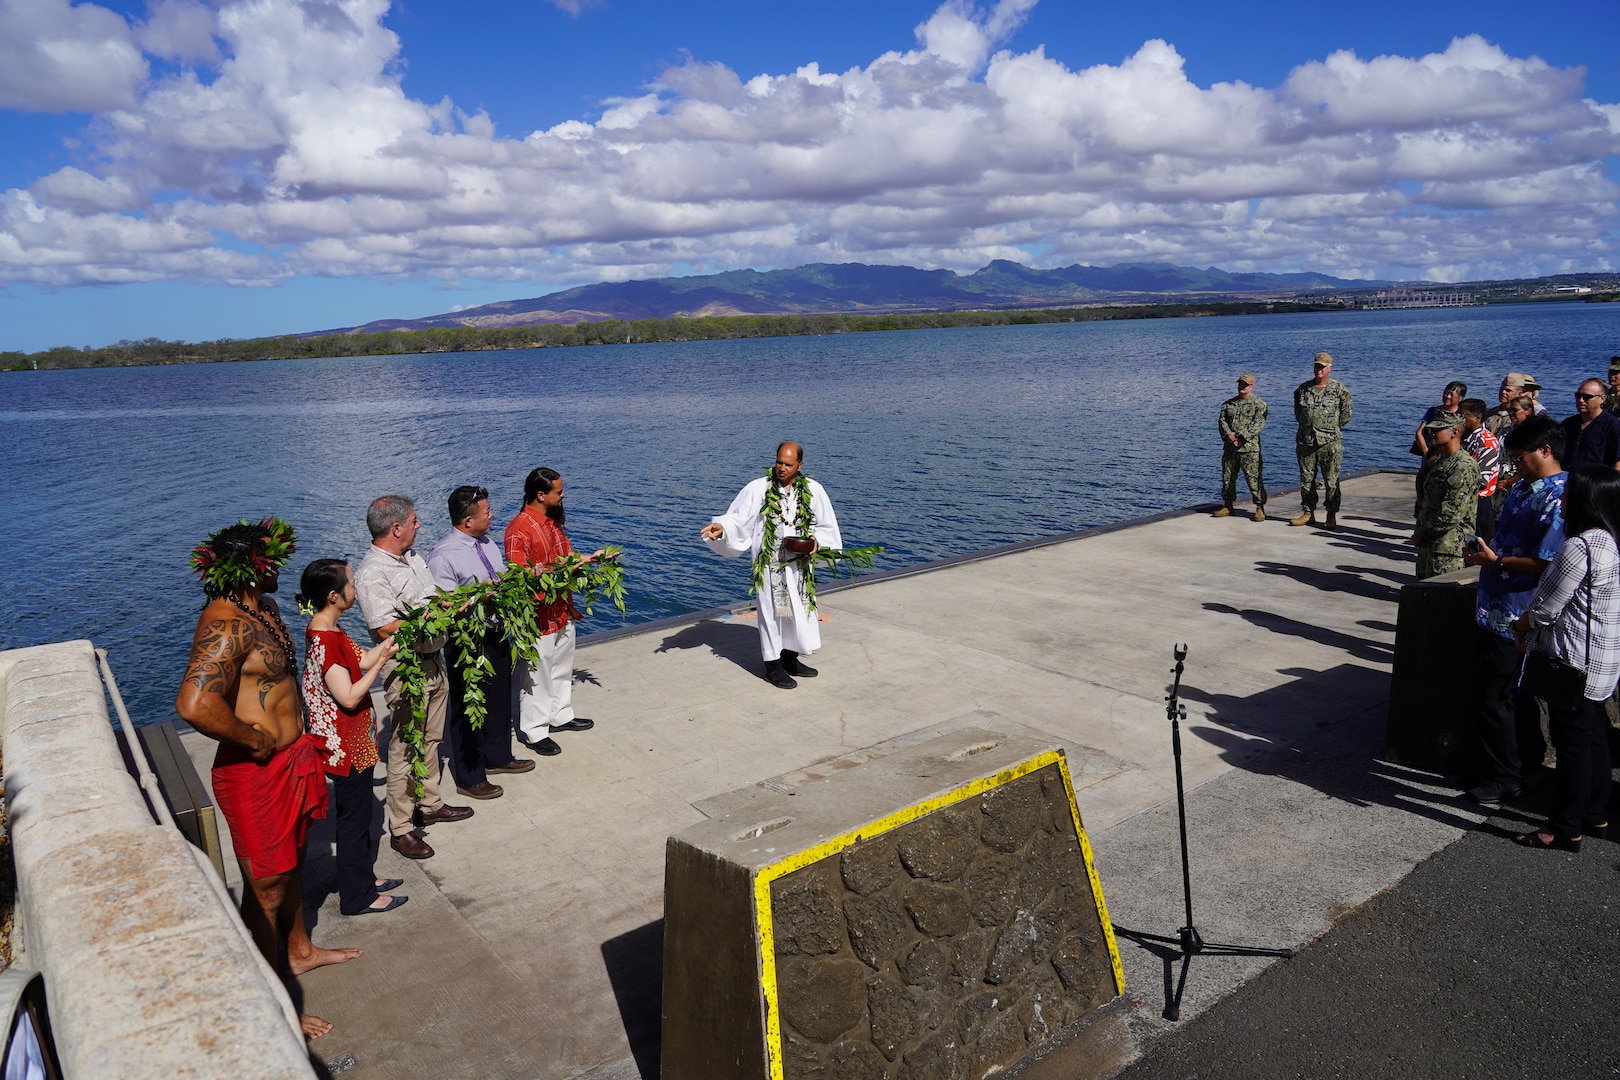 Kahu Kordell Kekoa, center, a Hawaiian priest, performs a traditional Hawaiian oli (chant) to bless the land, asking for protection and to foster good energy, during a Hawaiian blessing ceremony held at the water front of Pearl Harbor.